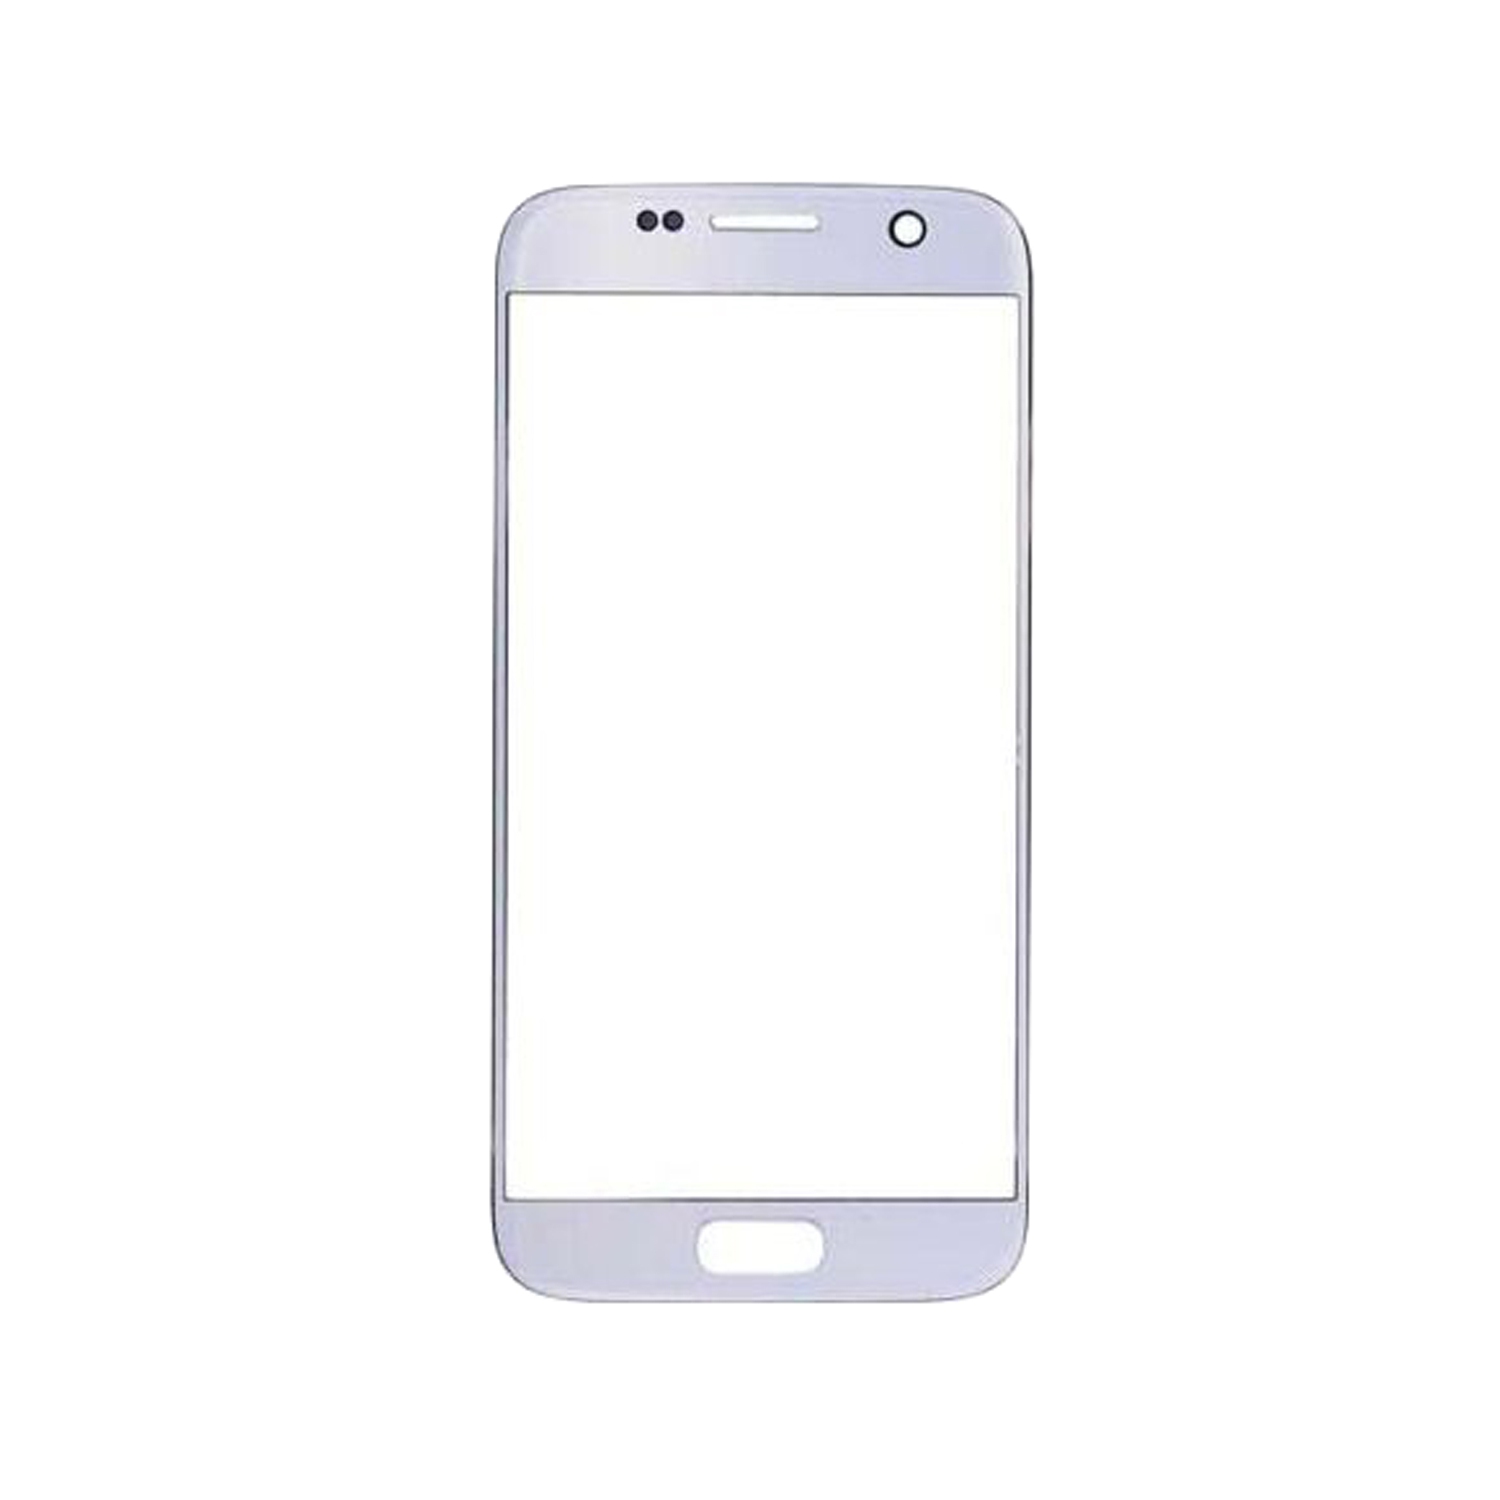 Samsung Galaxy S7 Edge G935W8 Top Glass Upper Glass Replacement - Silver